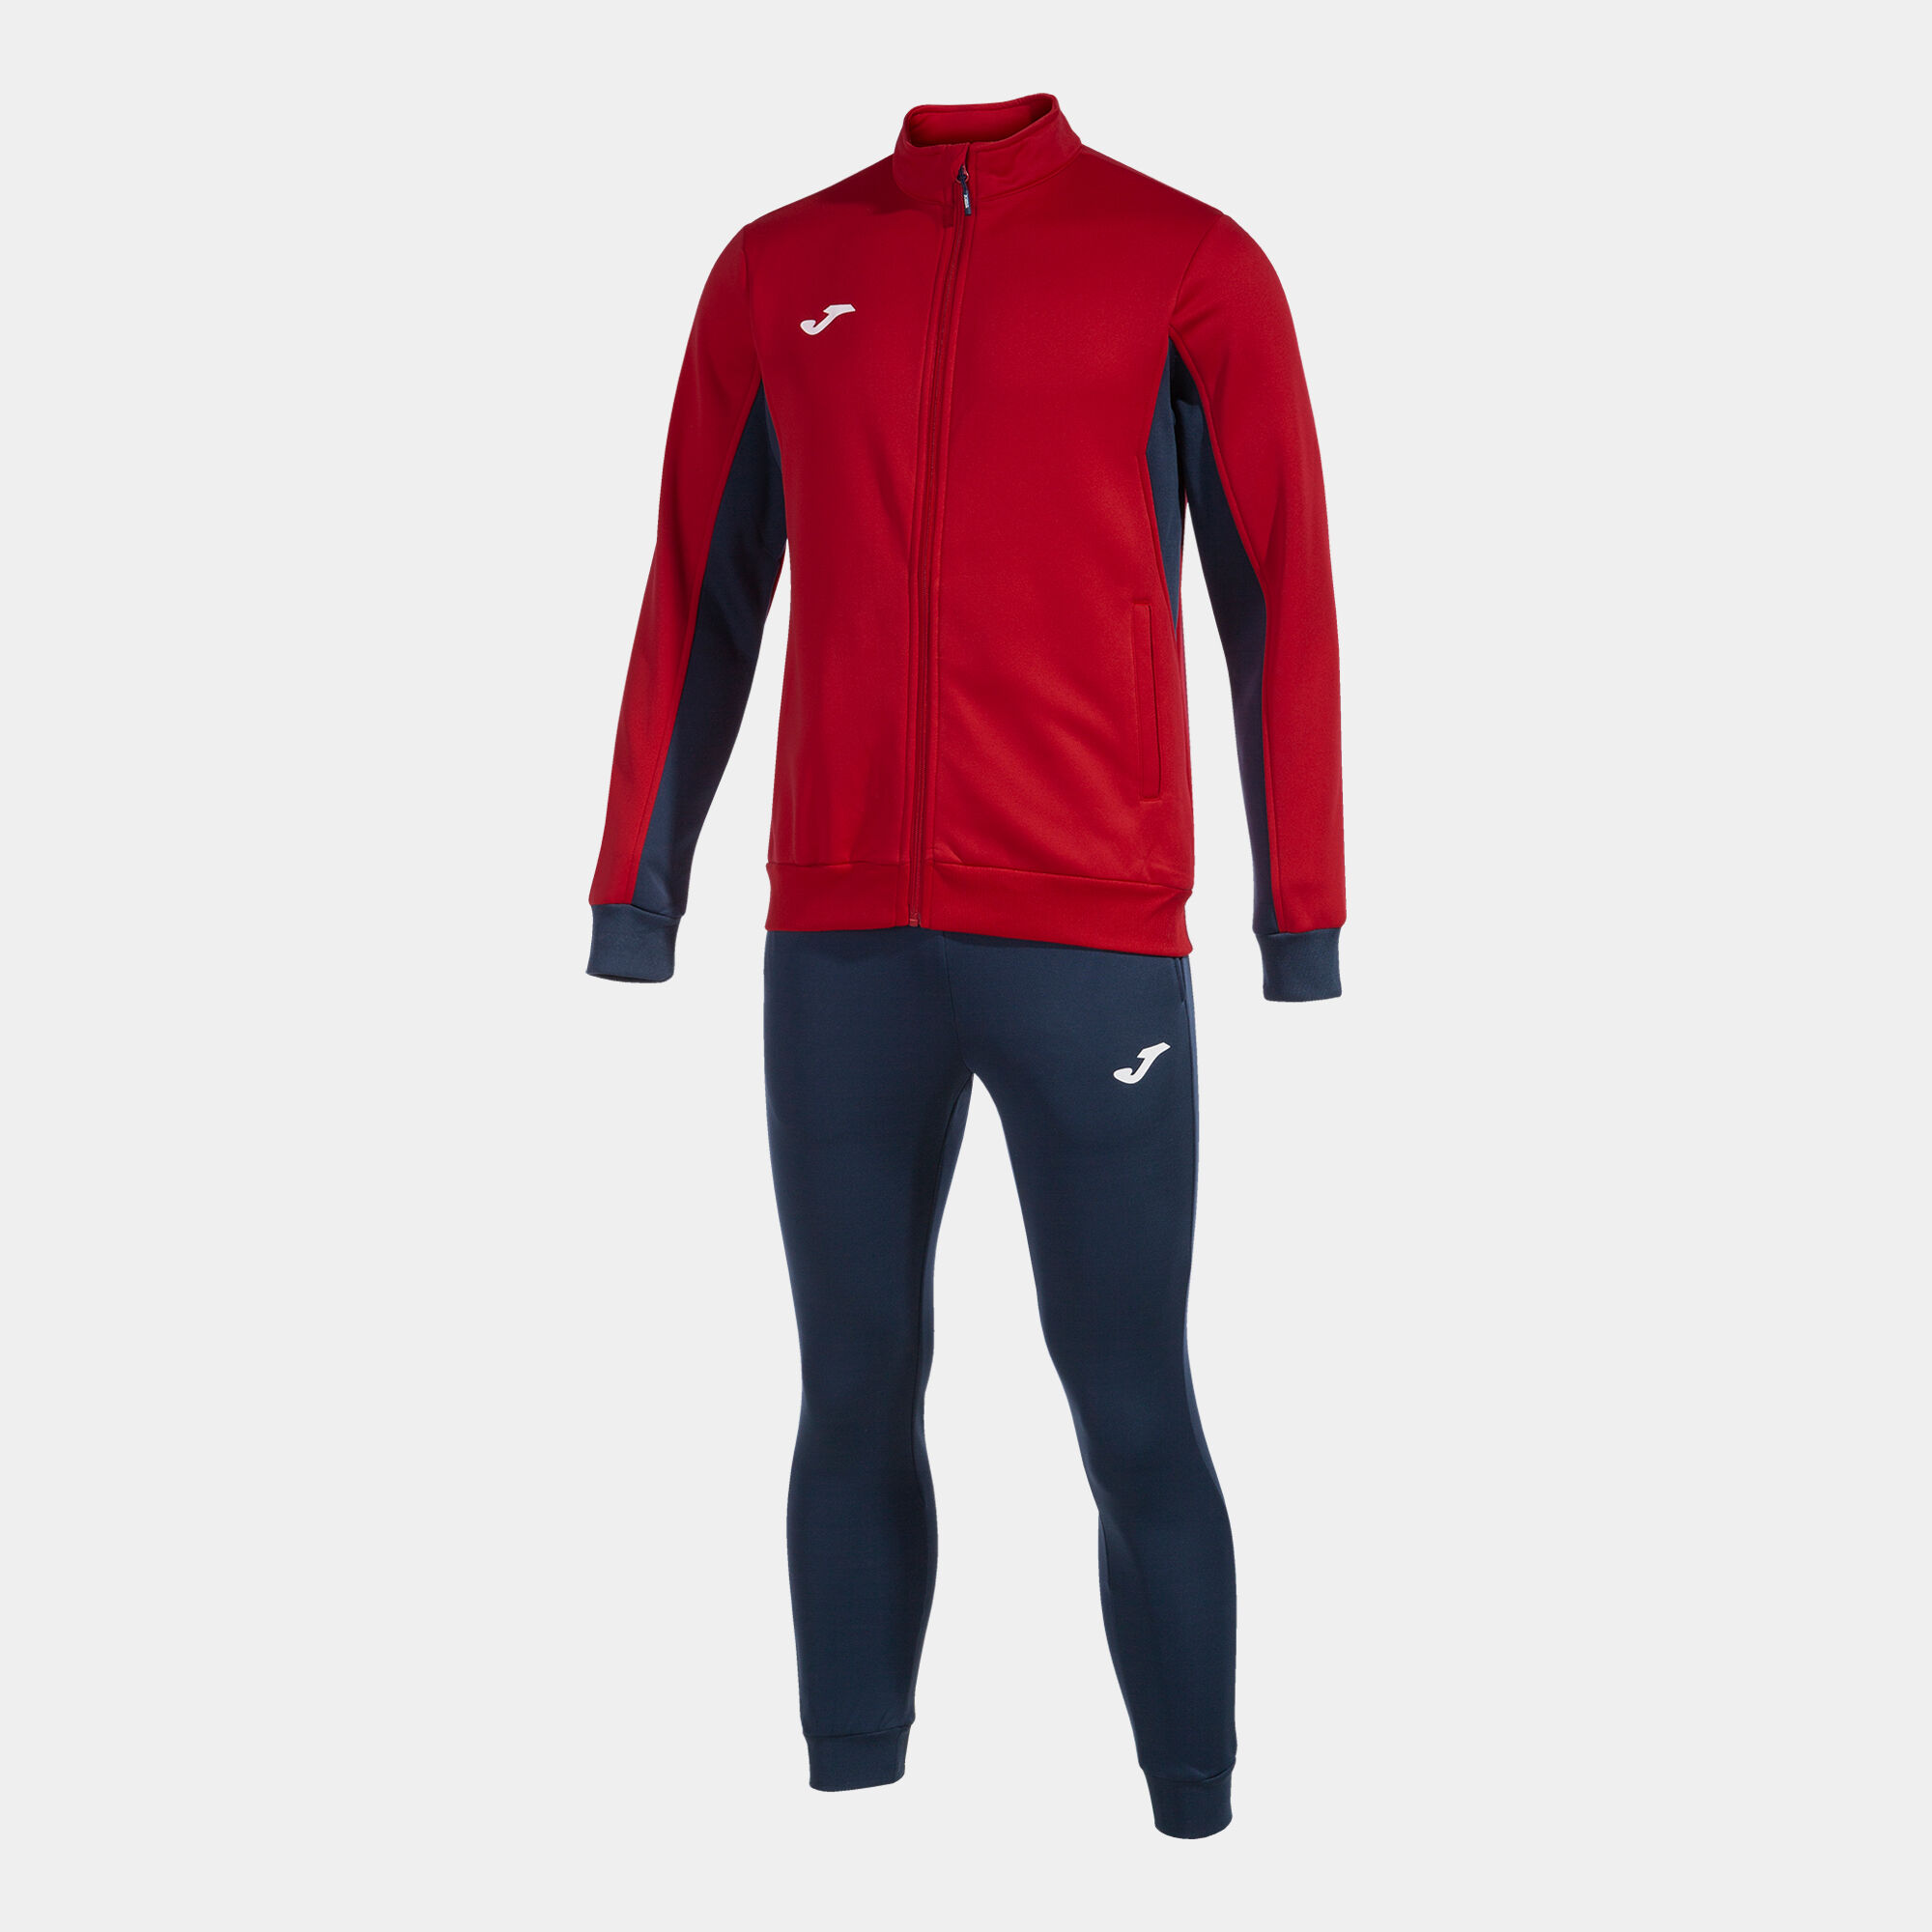 Tracksuit man Derby red navy blue